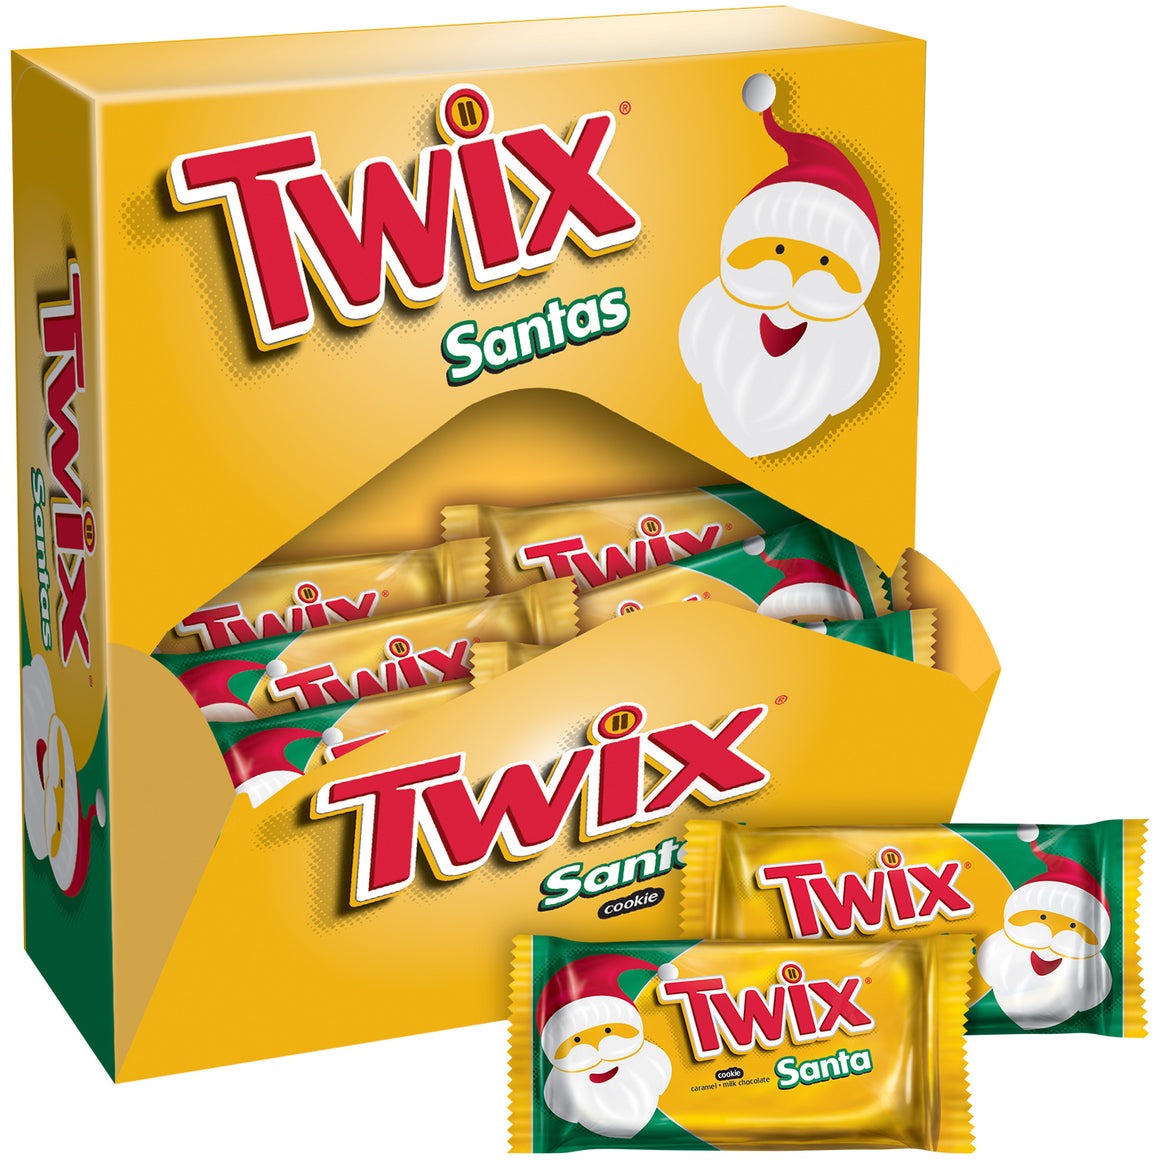 All City Candy Twix Santa - 1.06-oz. Bar Mars Chocolate For fresh candy and great service, visit www.allcitycandy.com